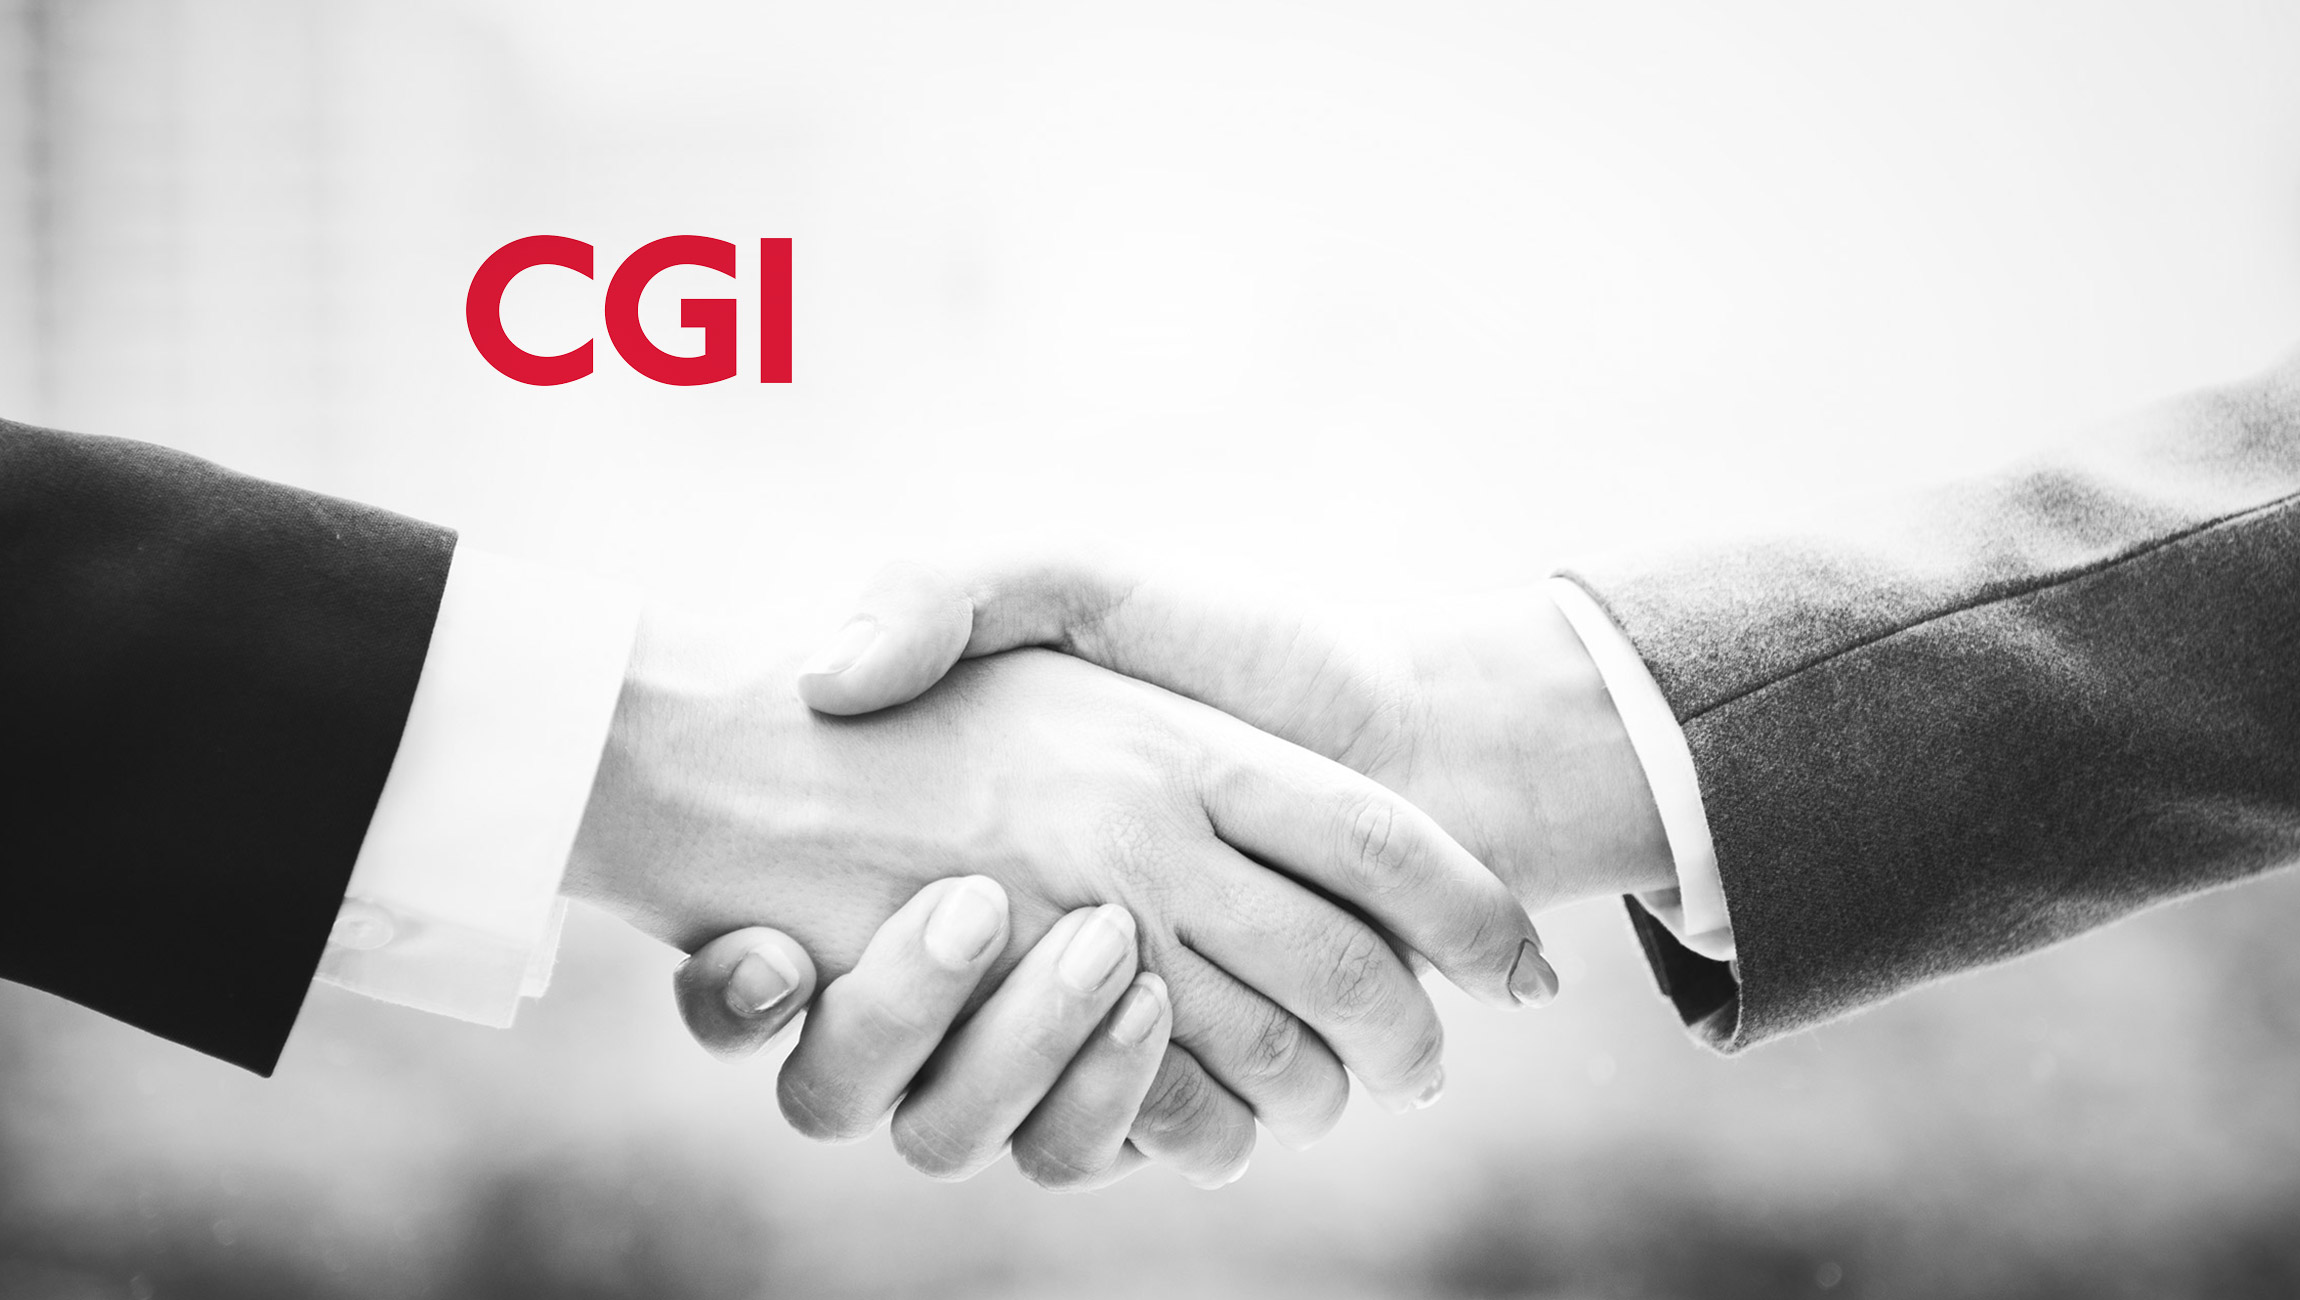 CGI Partners With NetApp To Help Clients Accelerate Data-Intensive Digital Transformation in the Cloud